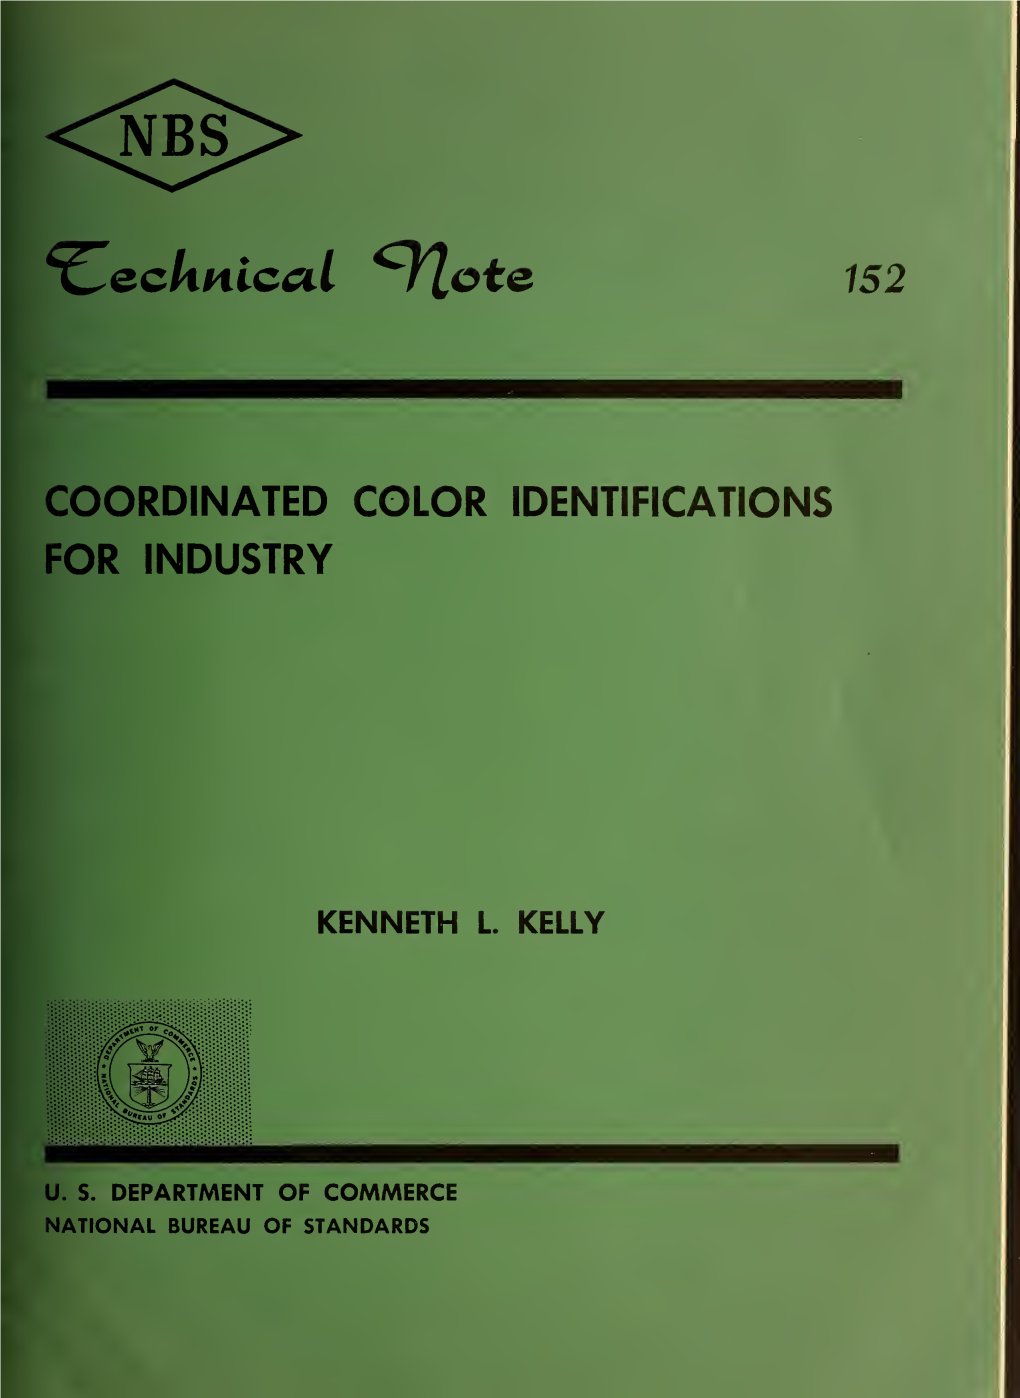 Coordinated Color Identifications for Industry